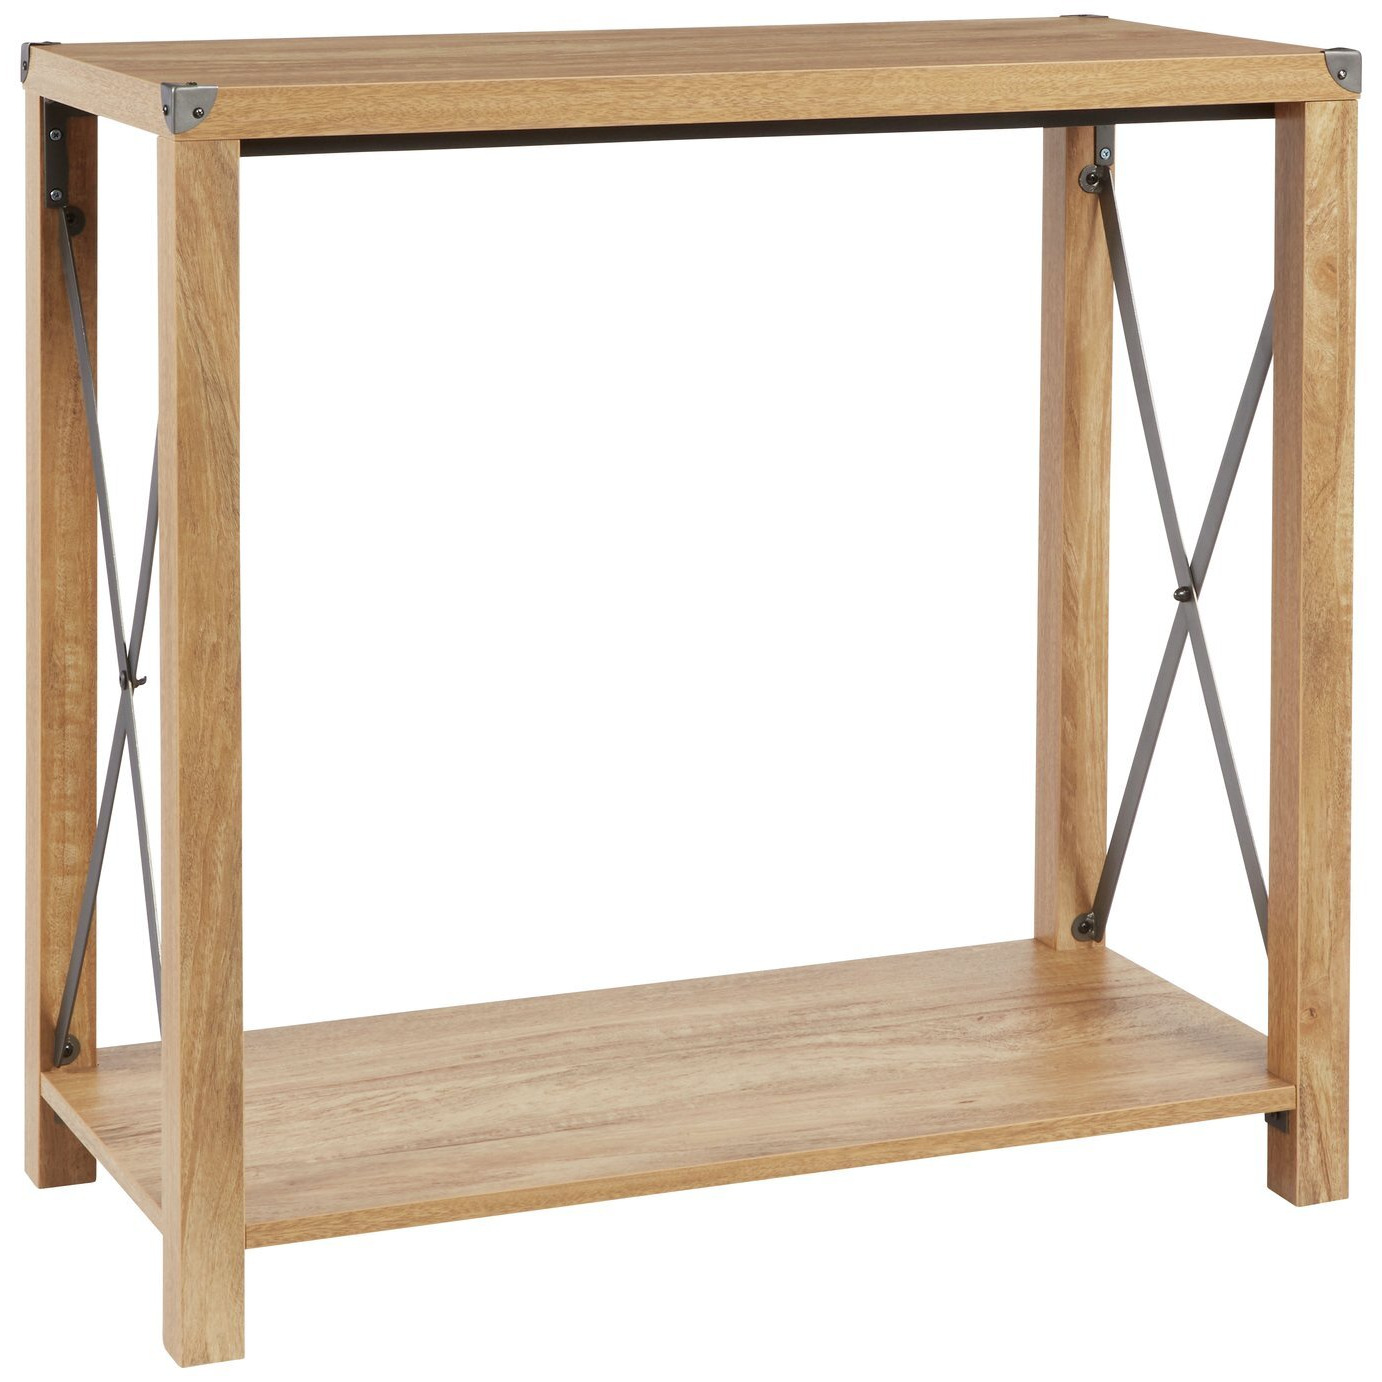 Lloyd Pascal Rustica Small Console Table - Light Wood - image 1